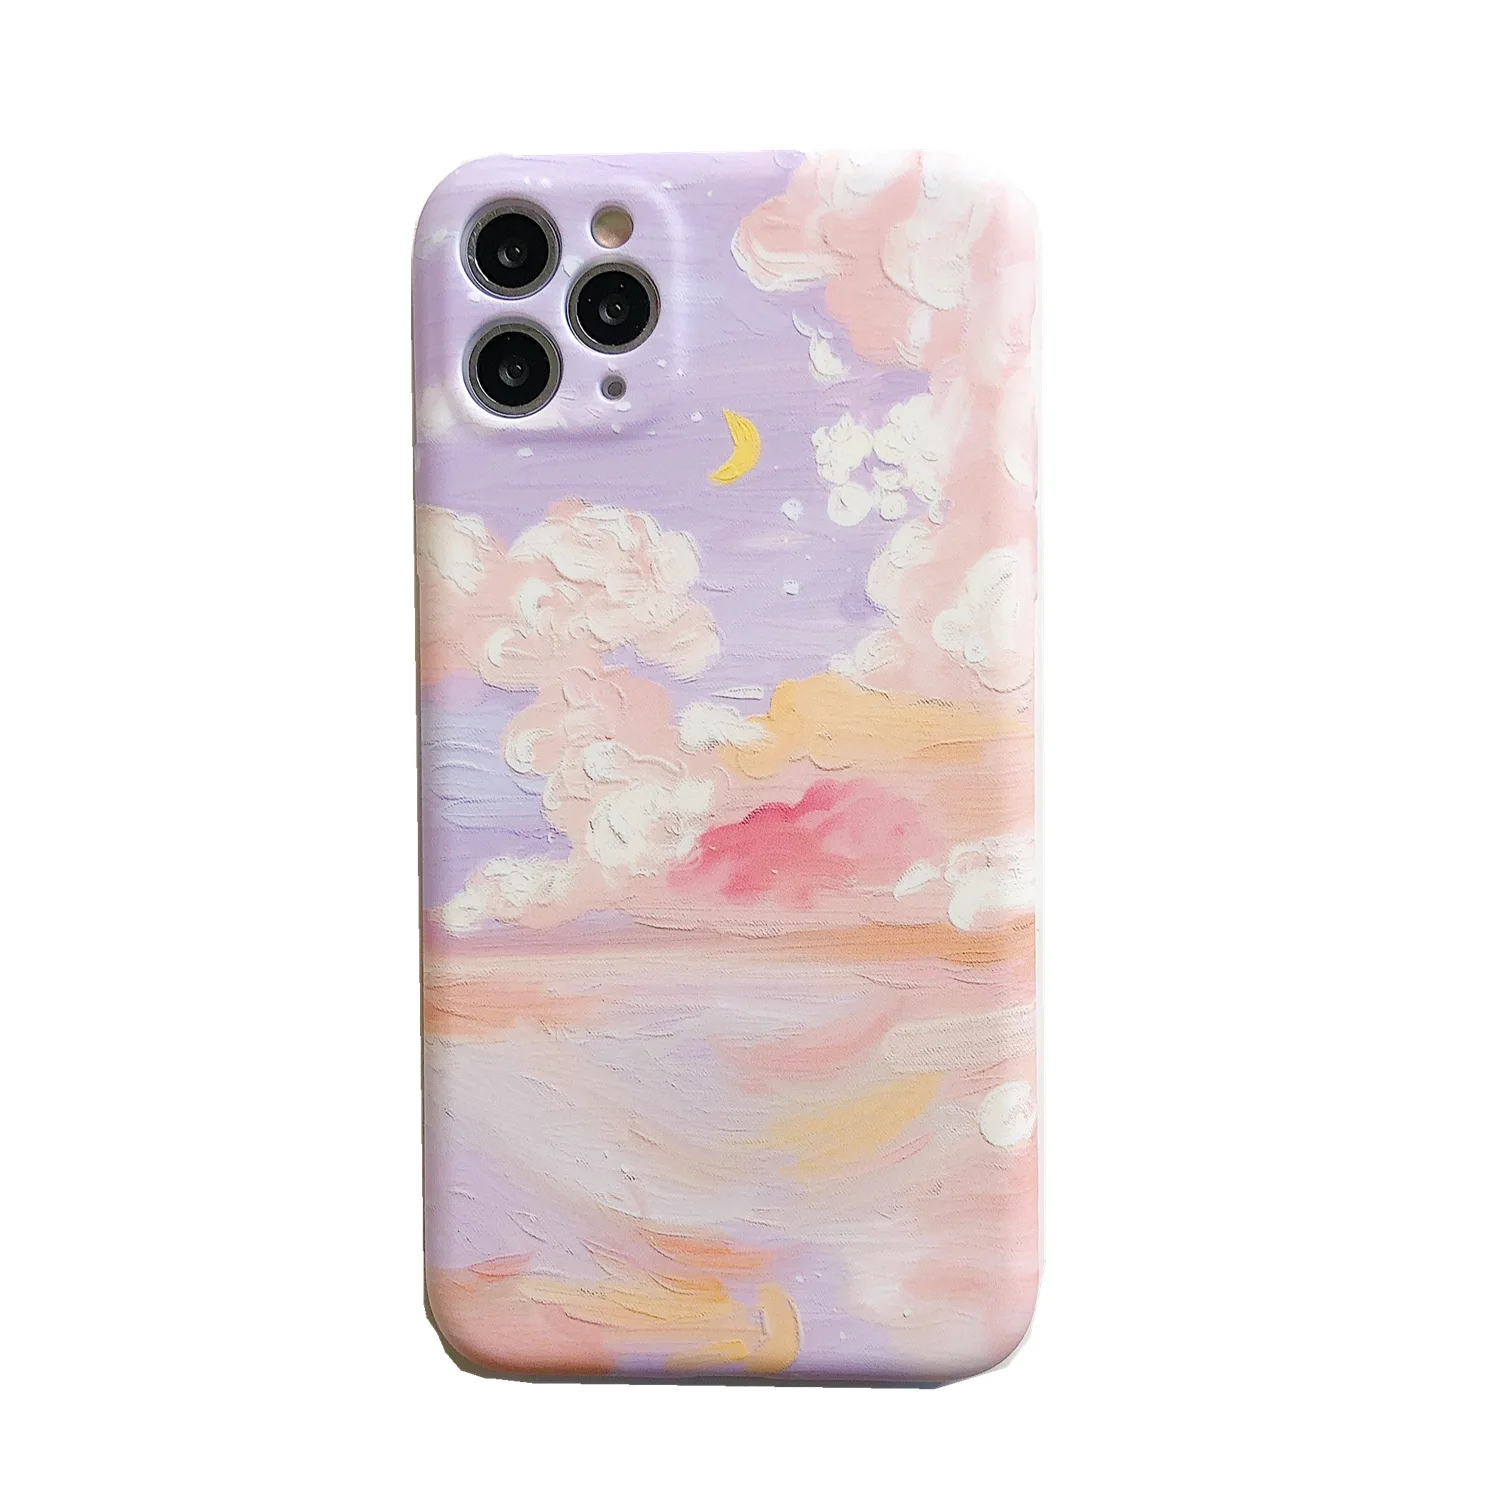 Oil Painting Pink Clouds For Apple IPhone Soft Feeling Cover Silicone Material Phone Protector Case